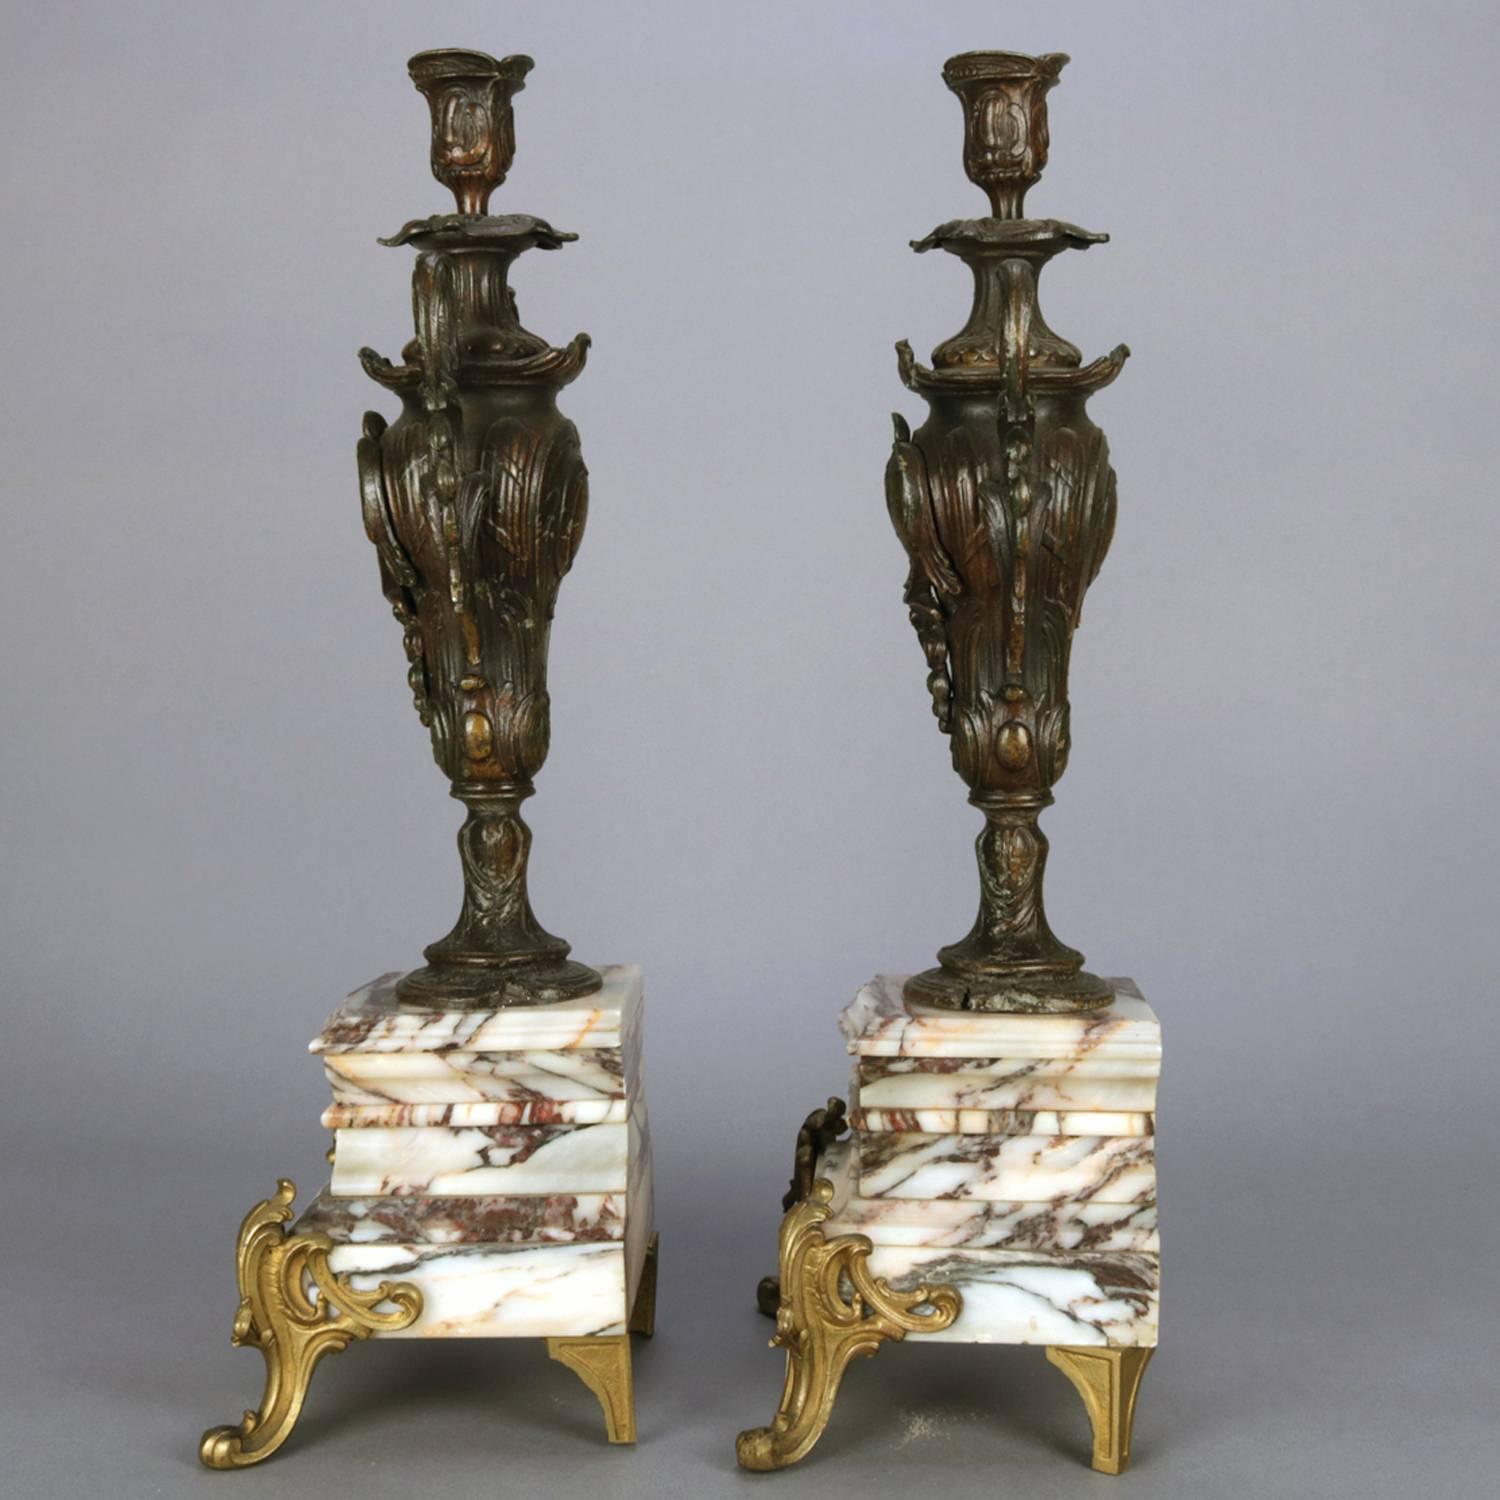 Pair of Classical Parcel-Gilt and Bronzed Urn Form Candlesticks on Marble Base 1